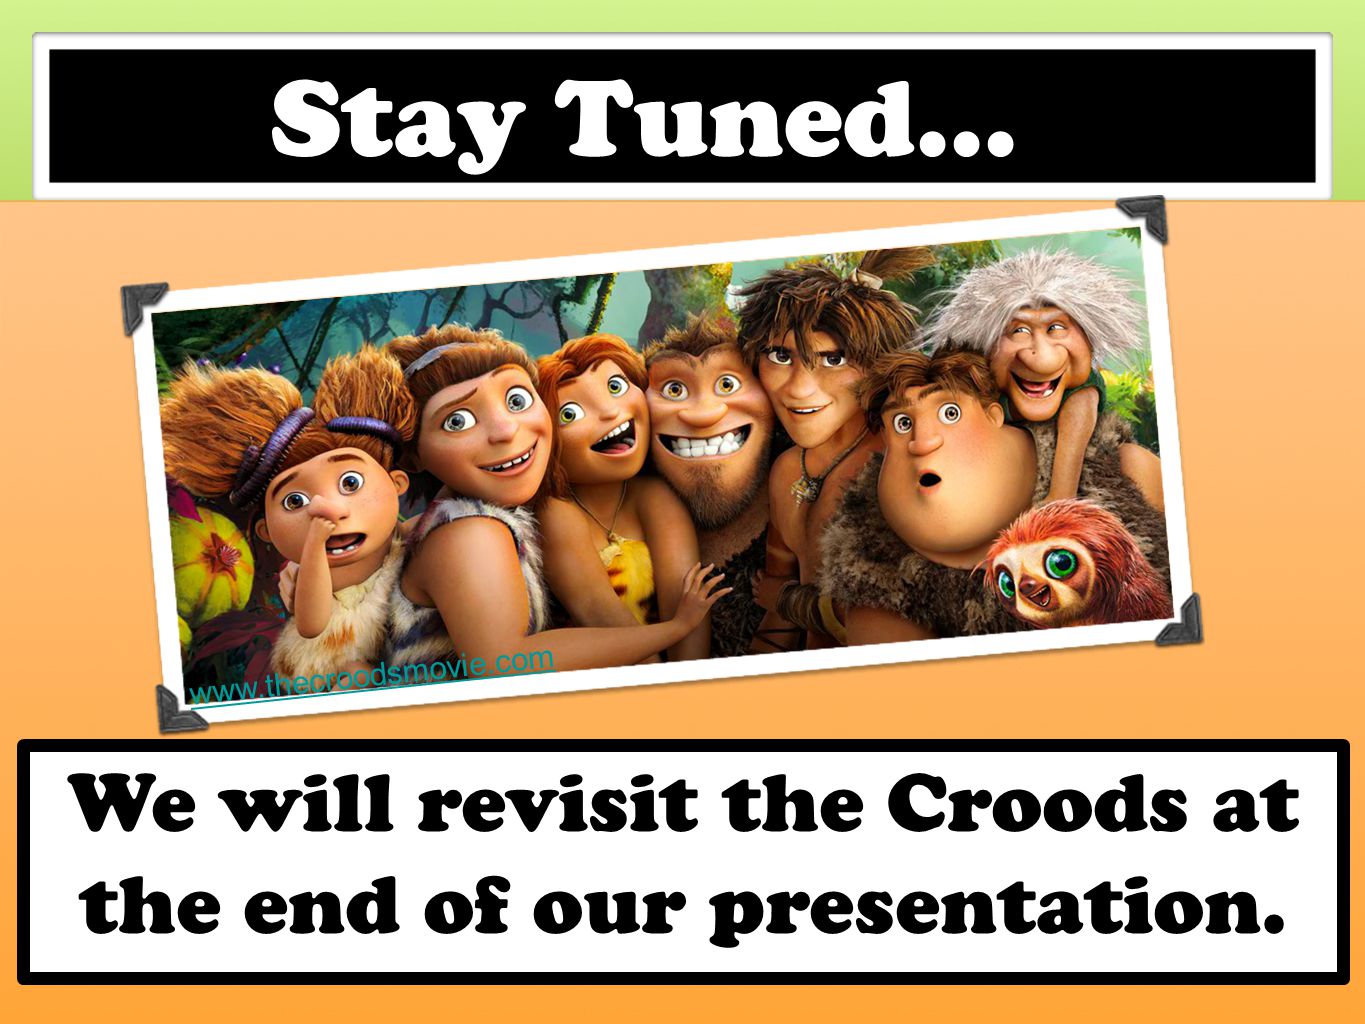 We will revisit the Croods at the end of our presentation.